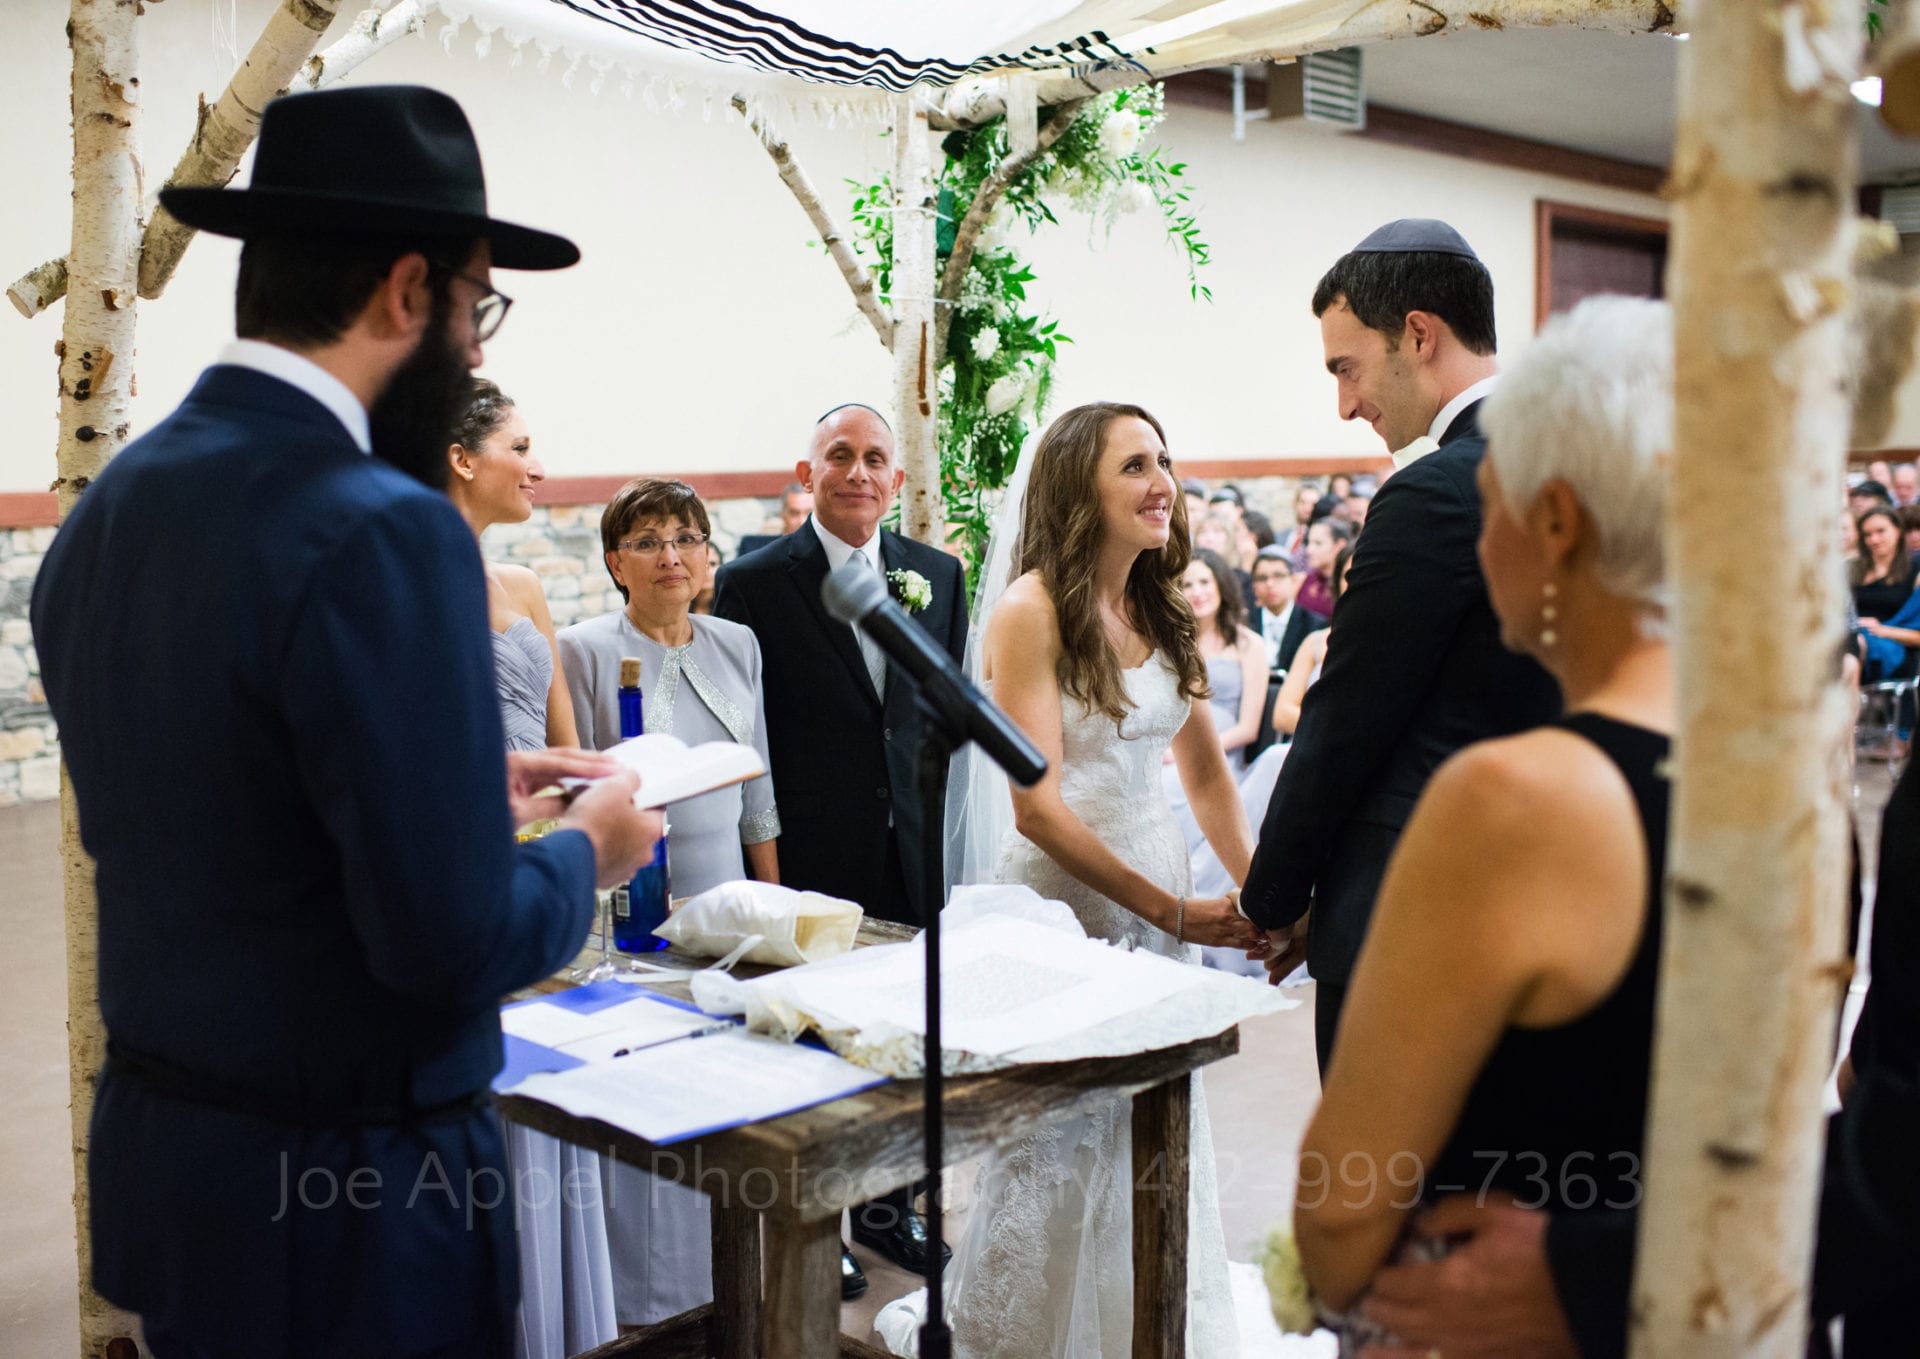 Seen from behind the rabbi, a couple exchanges wedding vows beneath a chuppah.